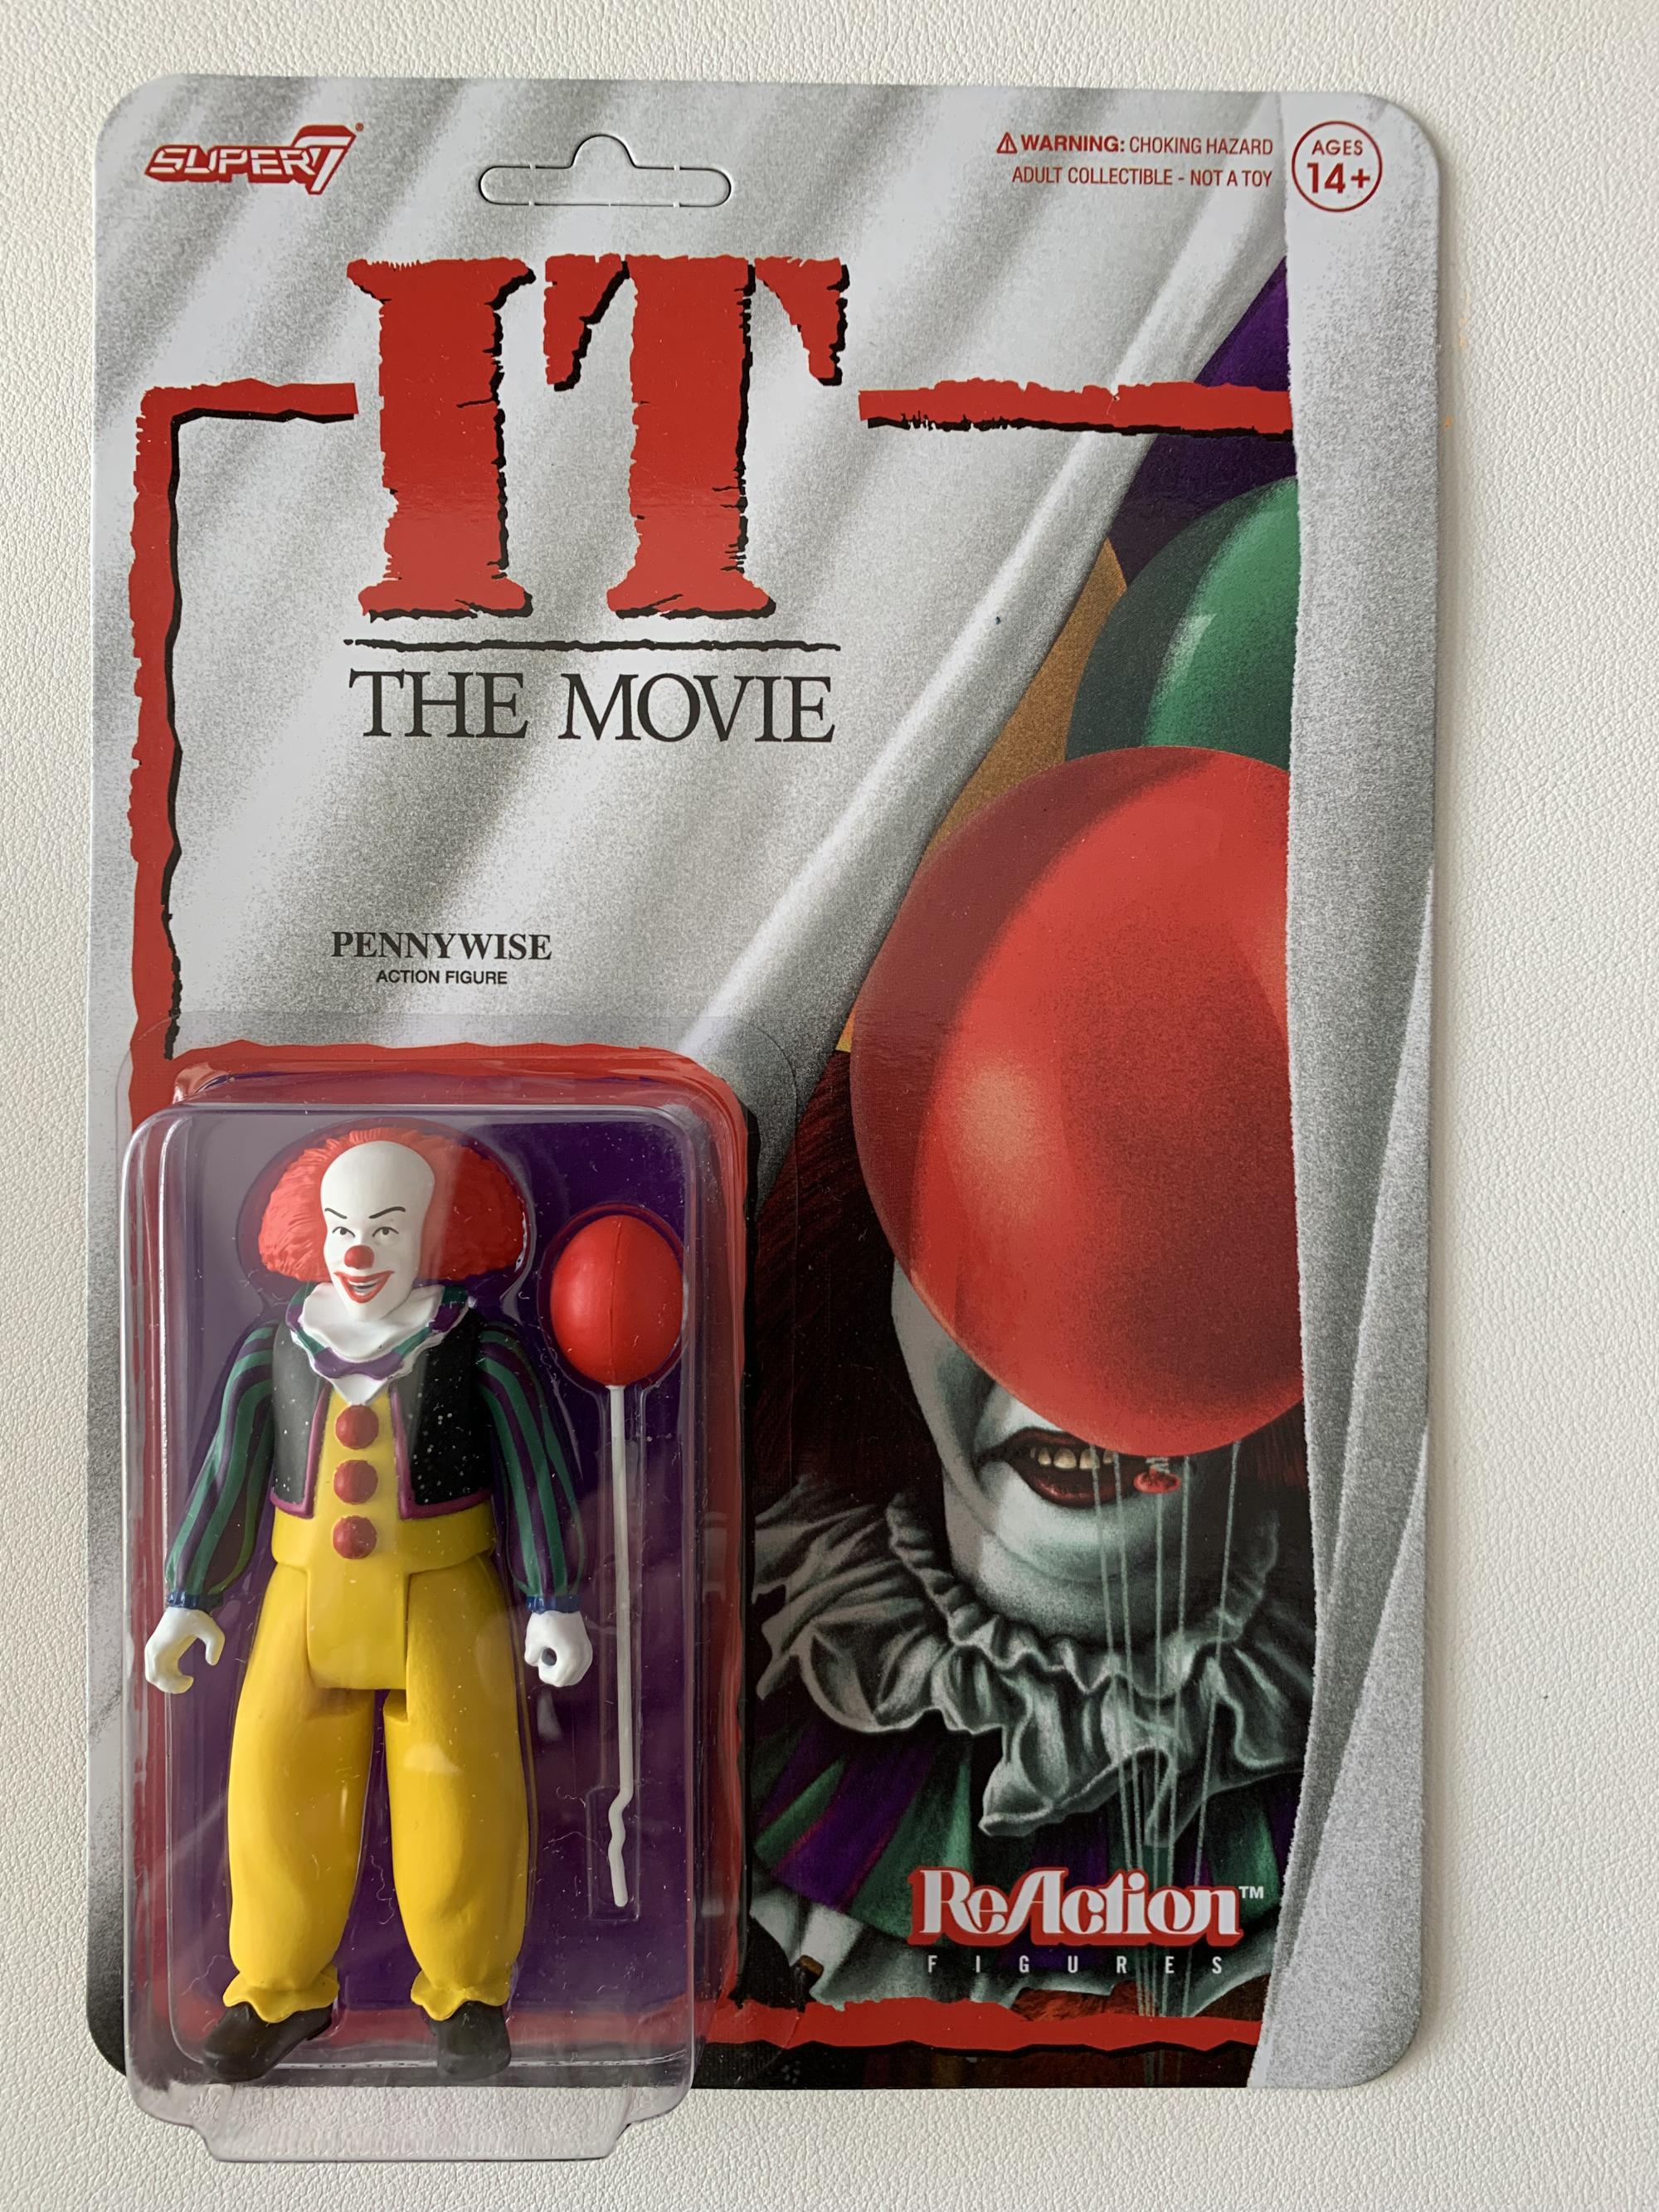 IT Pennywise Clown, ReAction Figure from ‘IT The Movie’ made by Super7